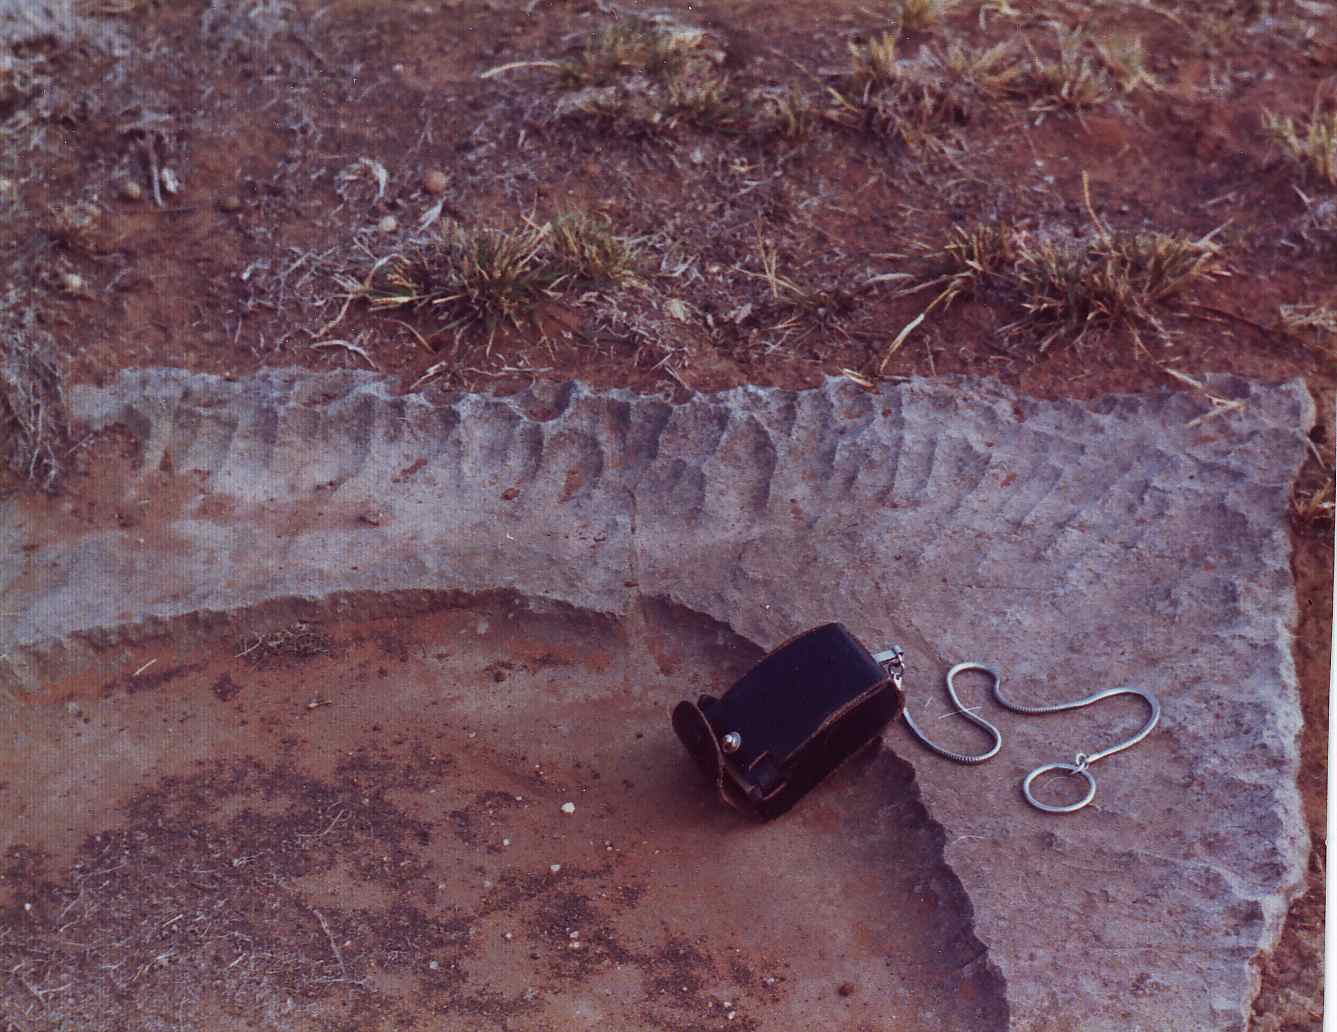 figure 111B - Close view of one of the mud crack plates (Ulco. S. Africa)